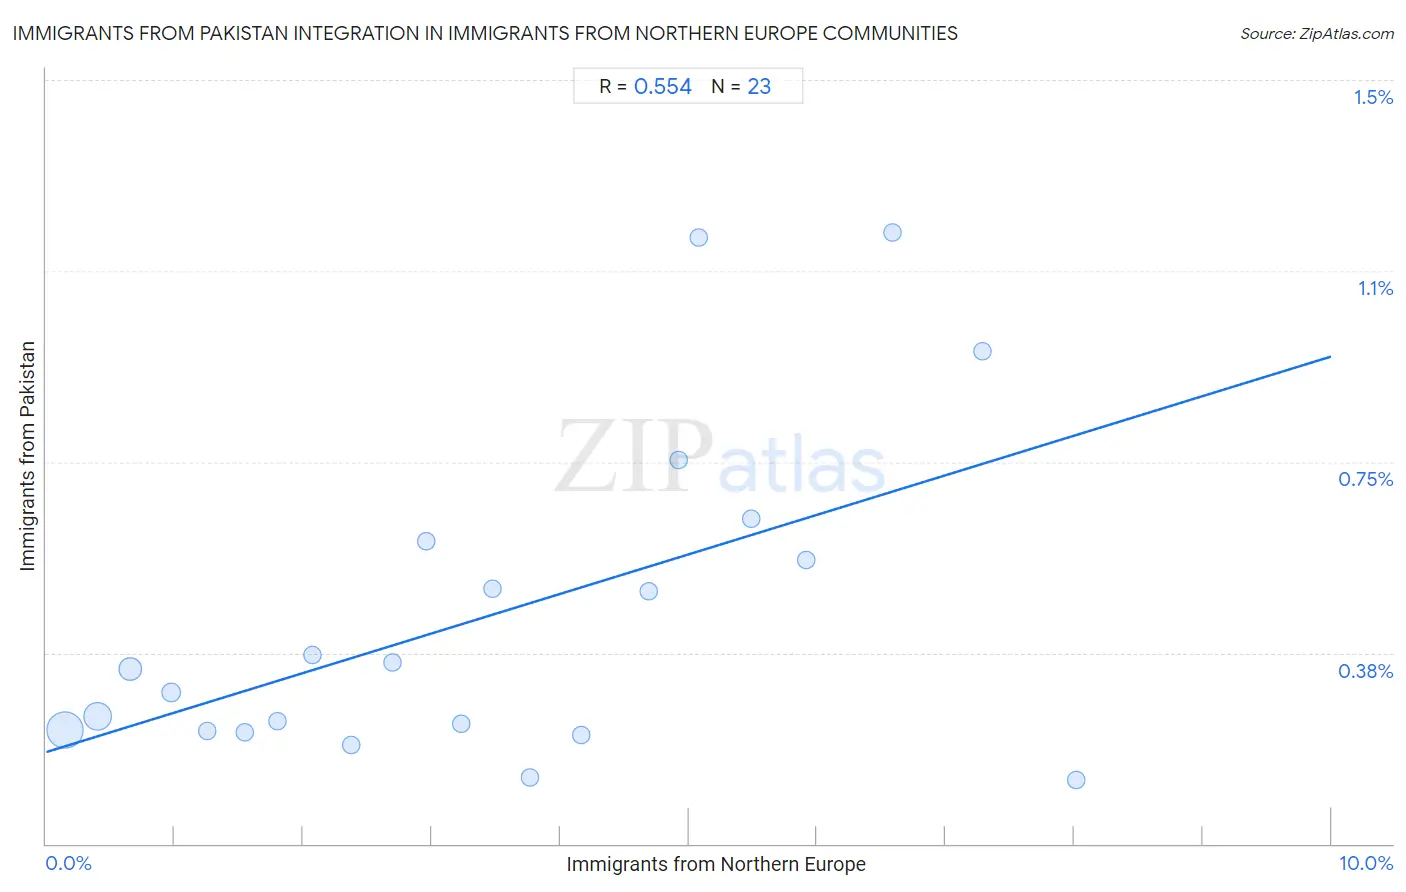 Immigrants from Northern Europe Integration in Immigrants from Pakistan Communities